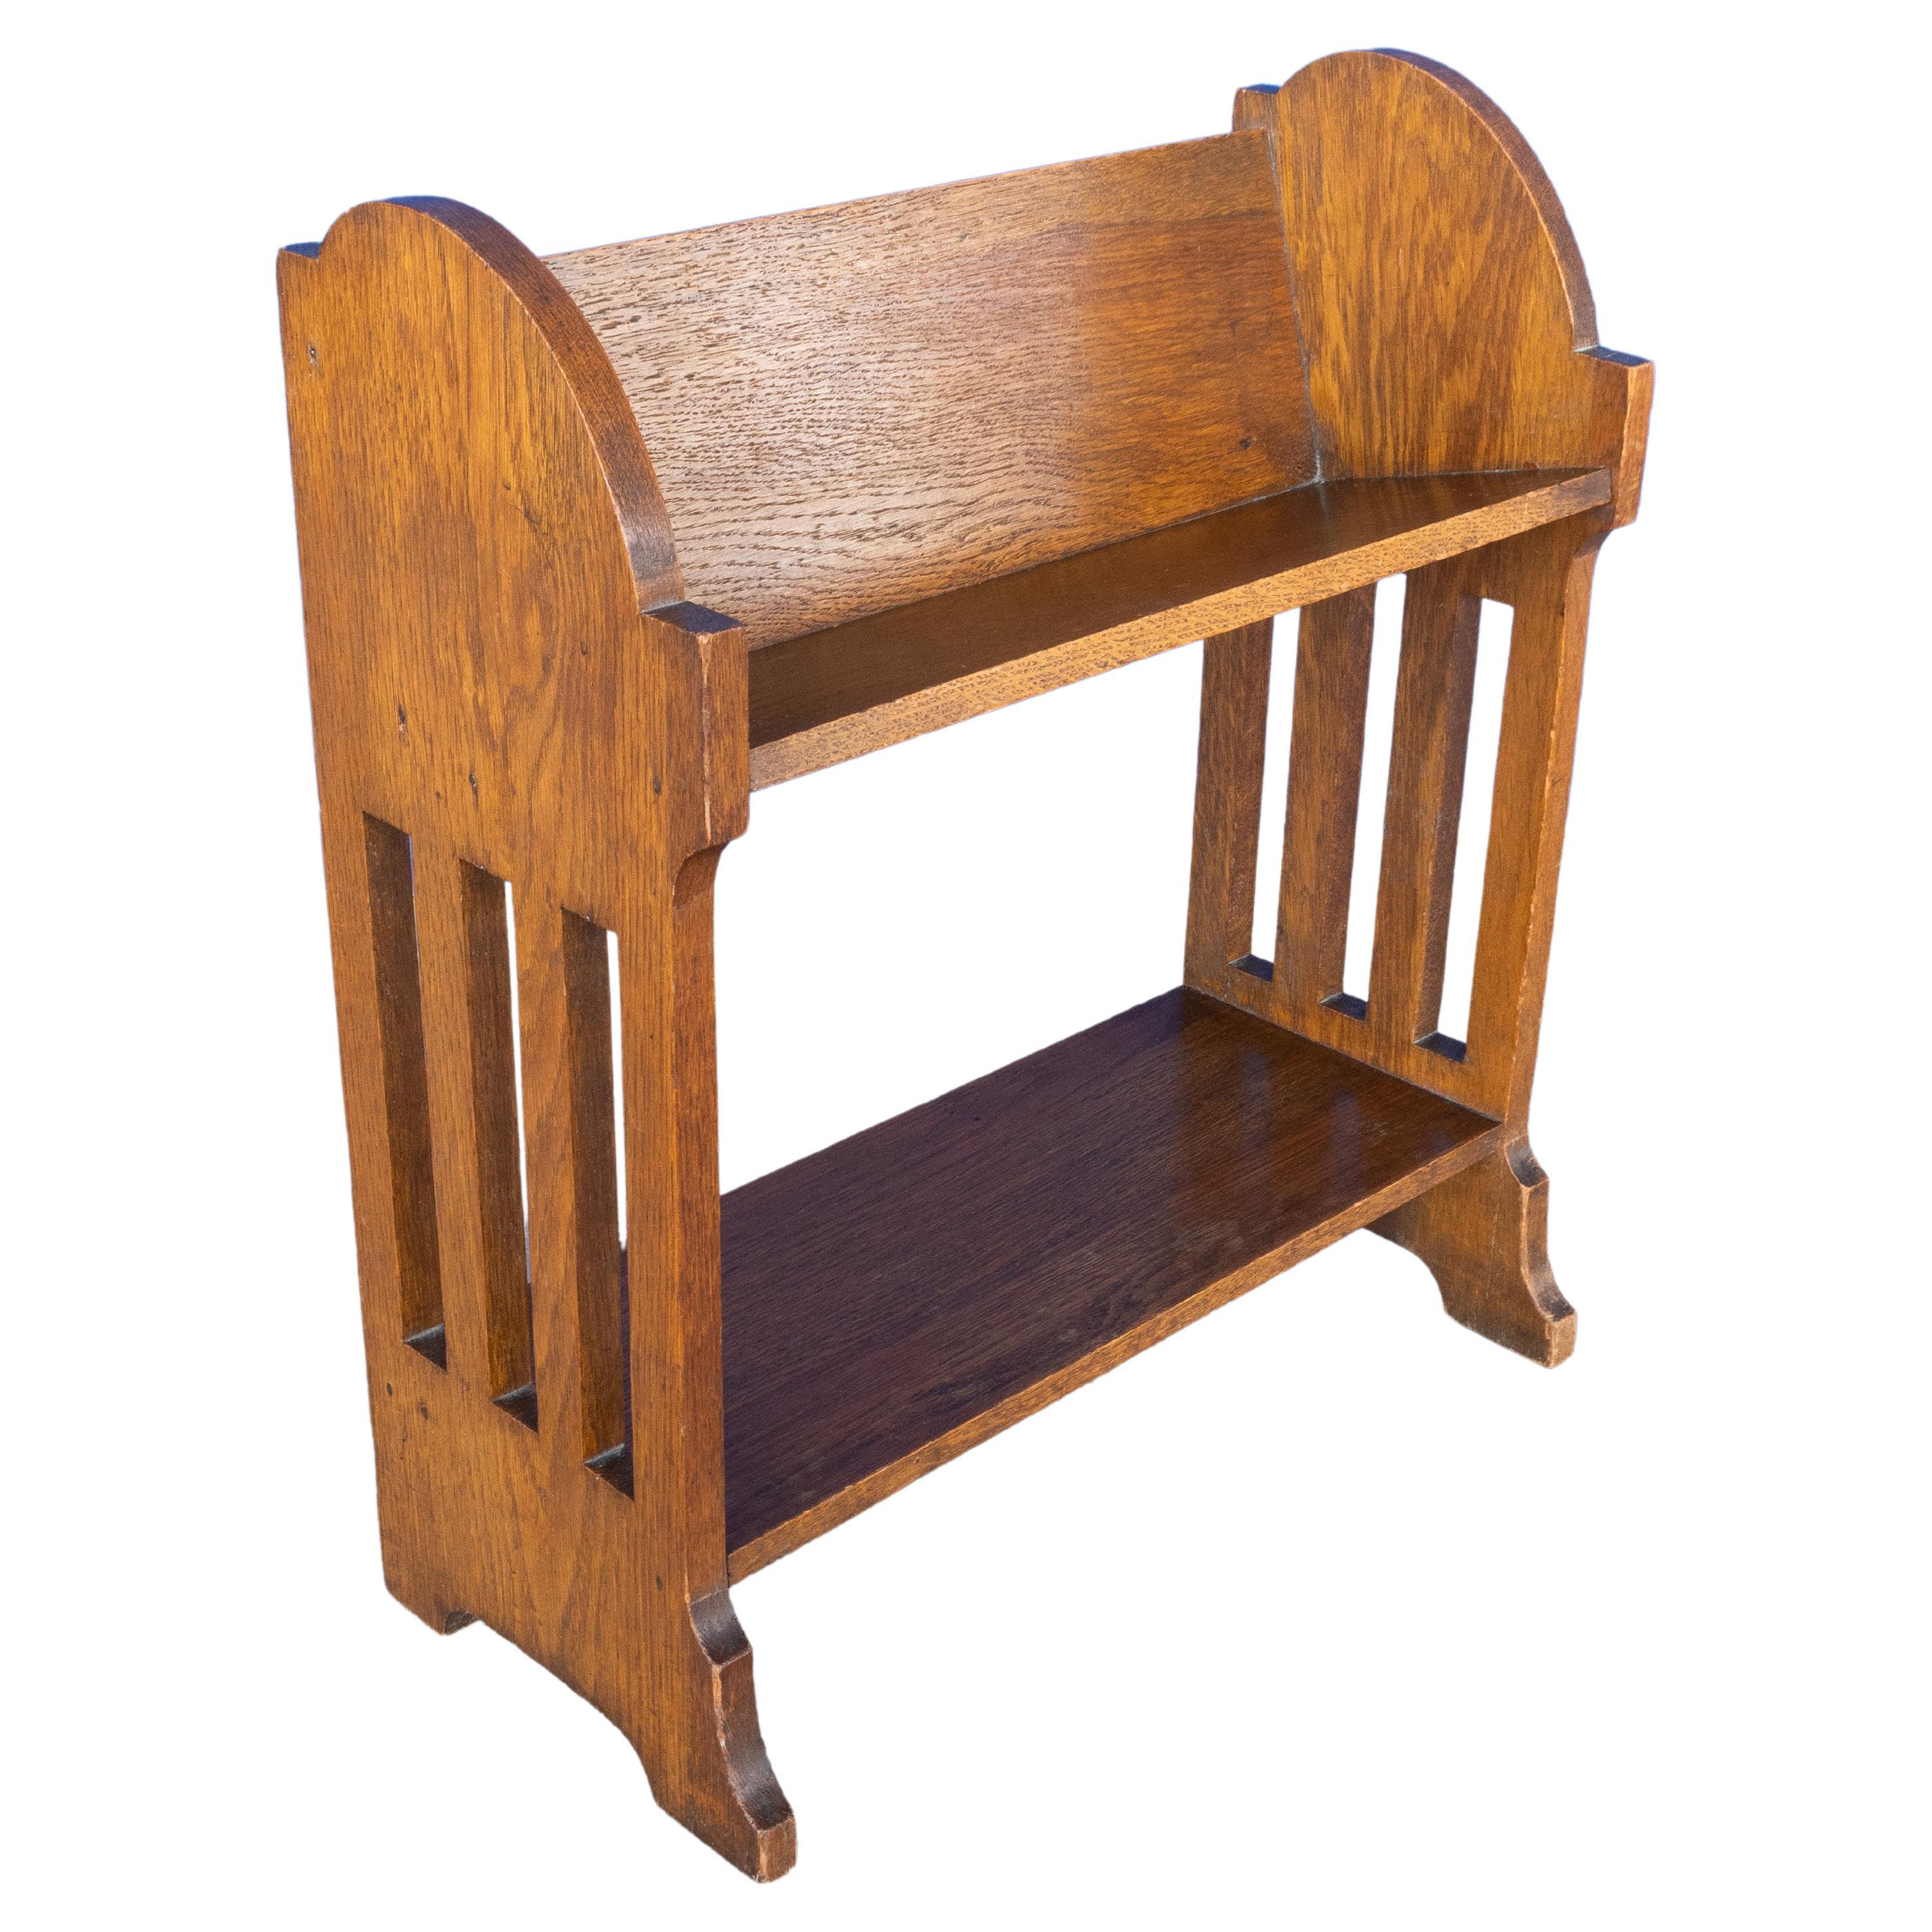 Early 20th Century English Arts And Crafts Golden Oak Trough Table Top Bookcase Liberty Of London  For Sale